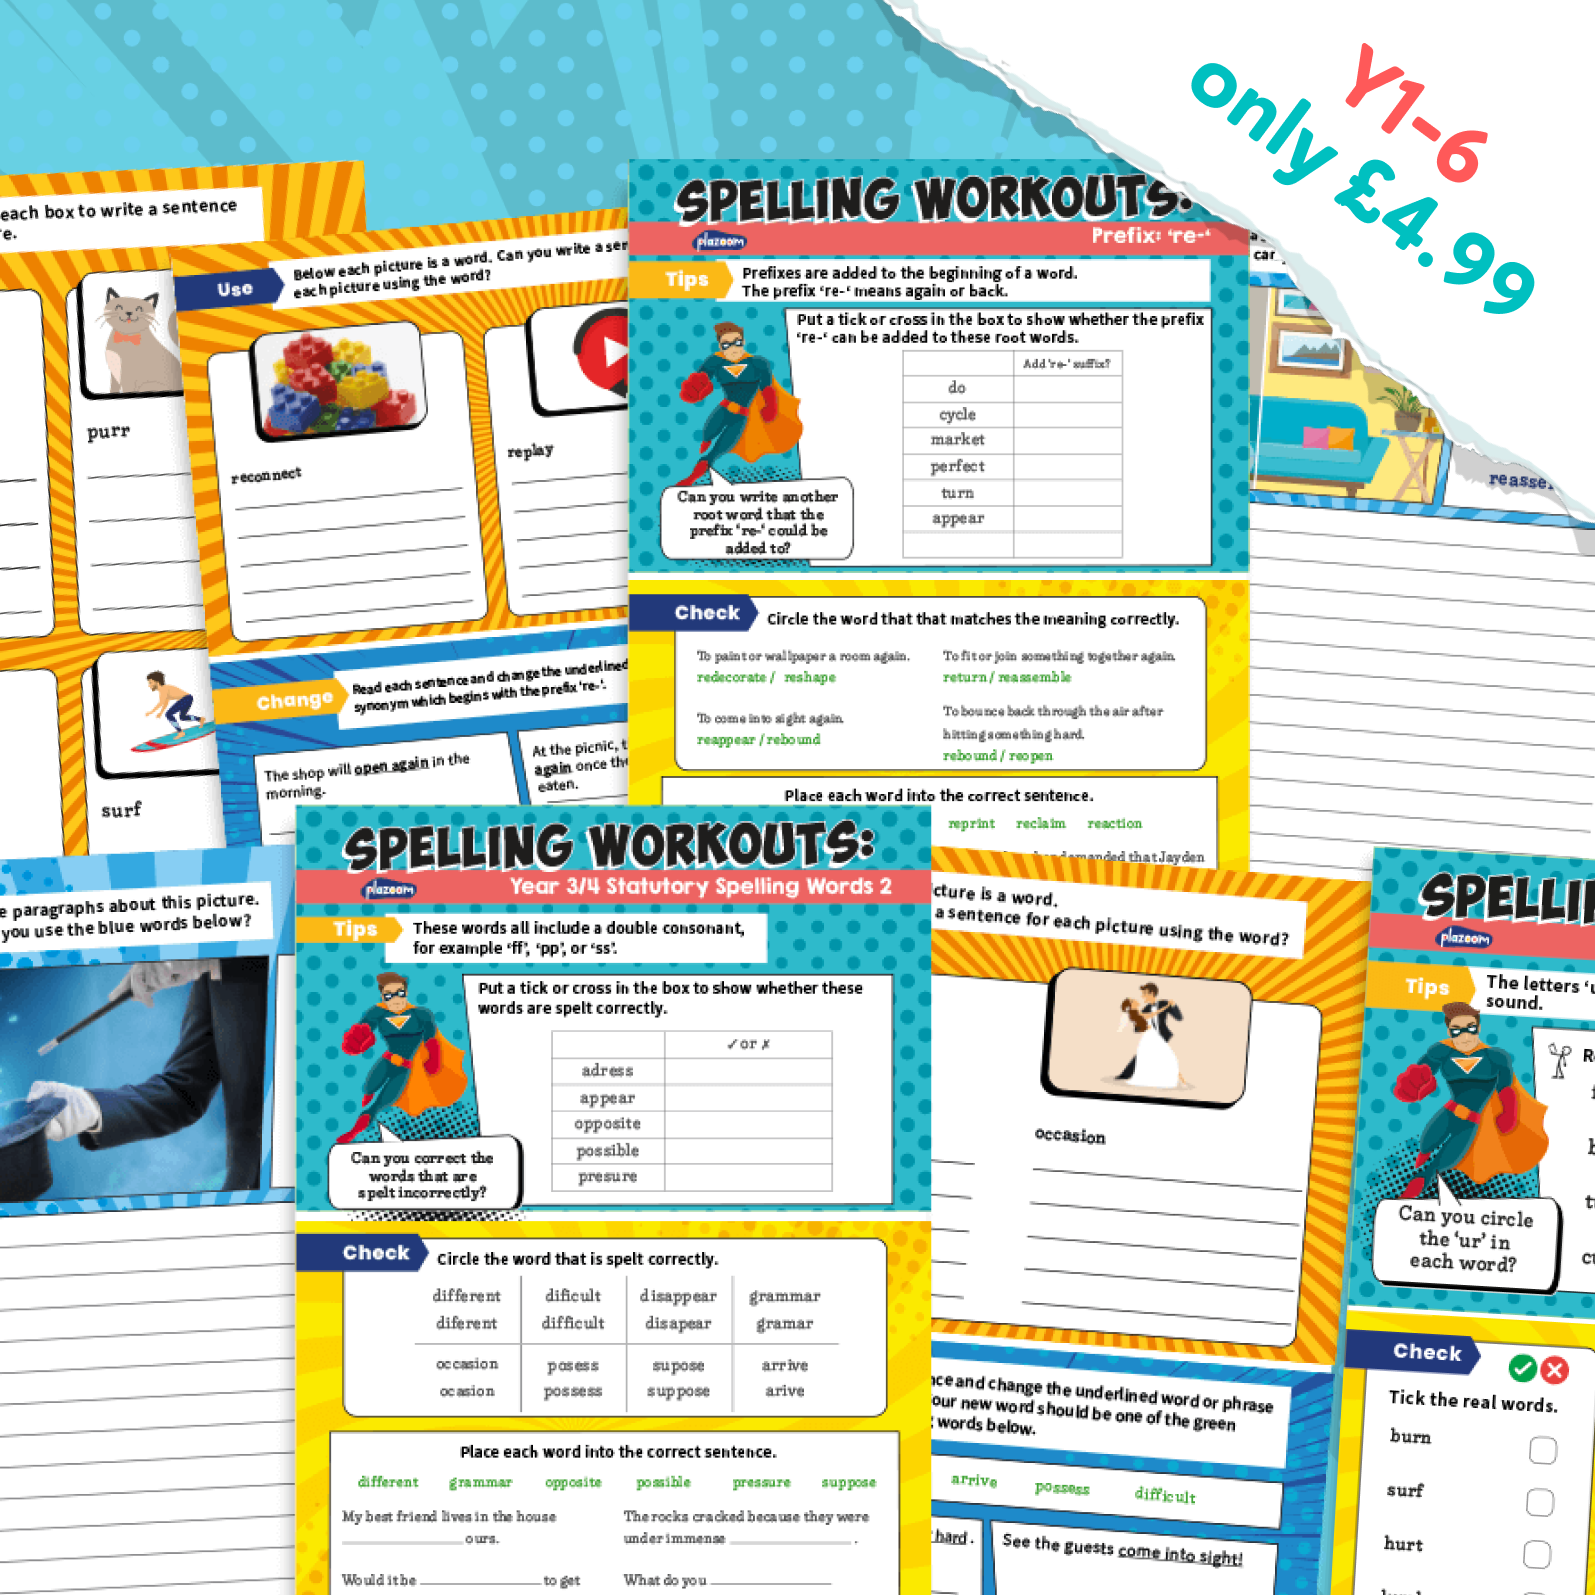 Main Image for Unlock all Spelling Workouts activities for just £4.99 and receive: